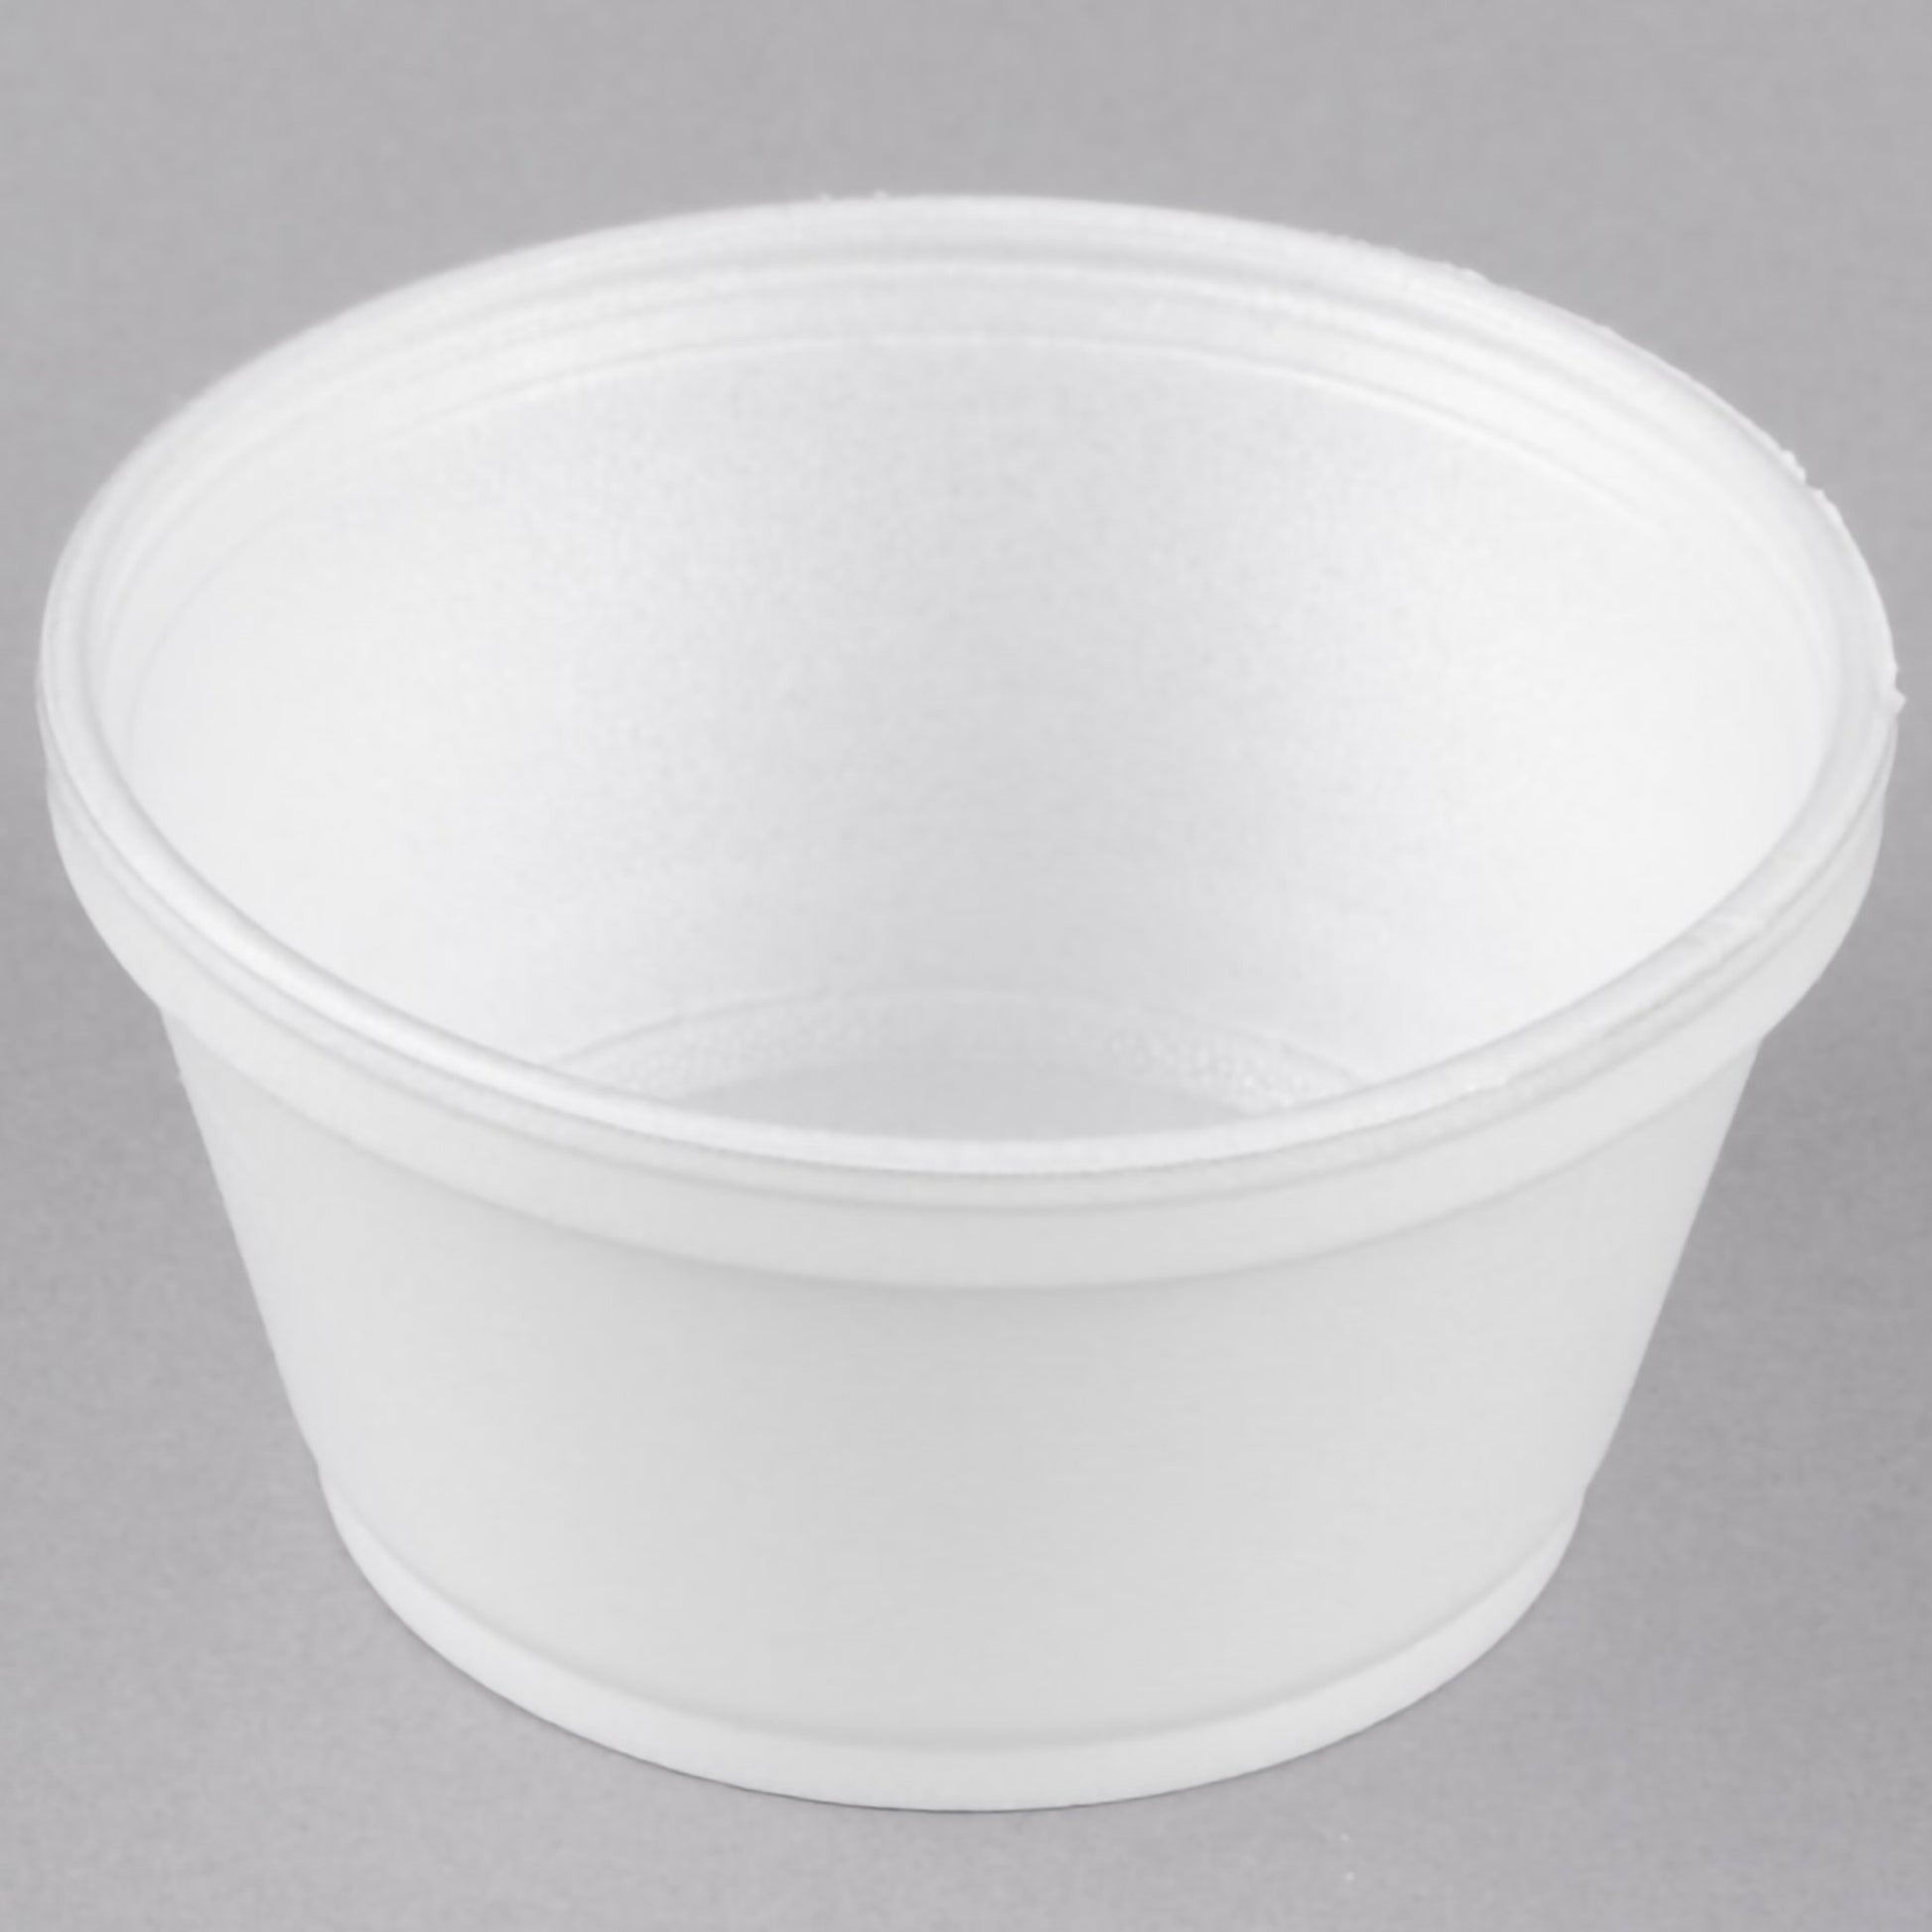 J Cup® Insulated Food Container, 8 Oz., Sold As 50/Sleeve Rj 8Sj20